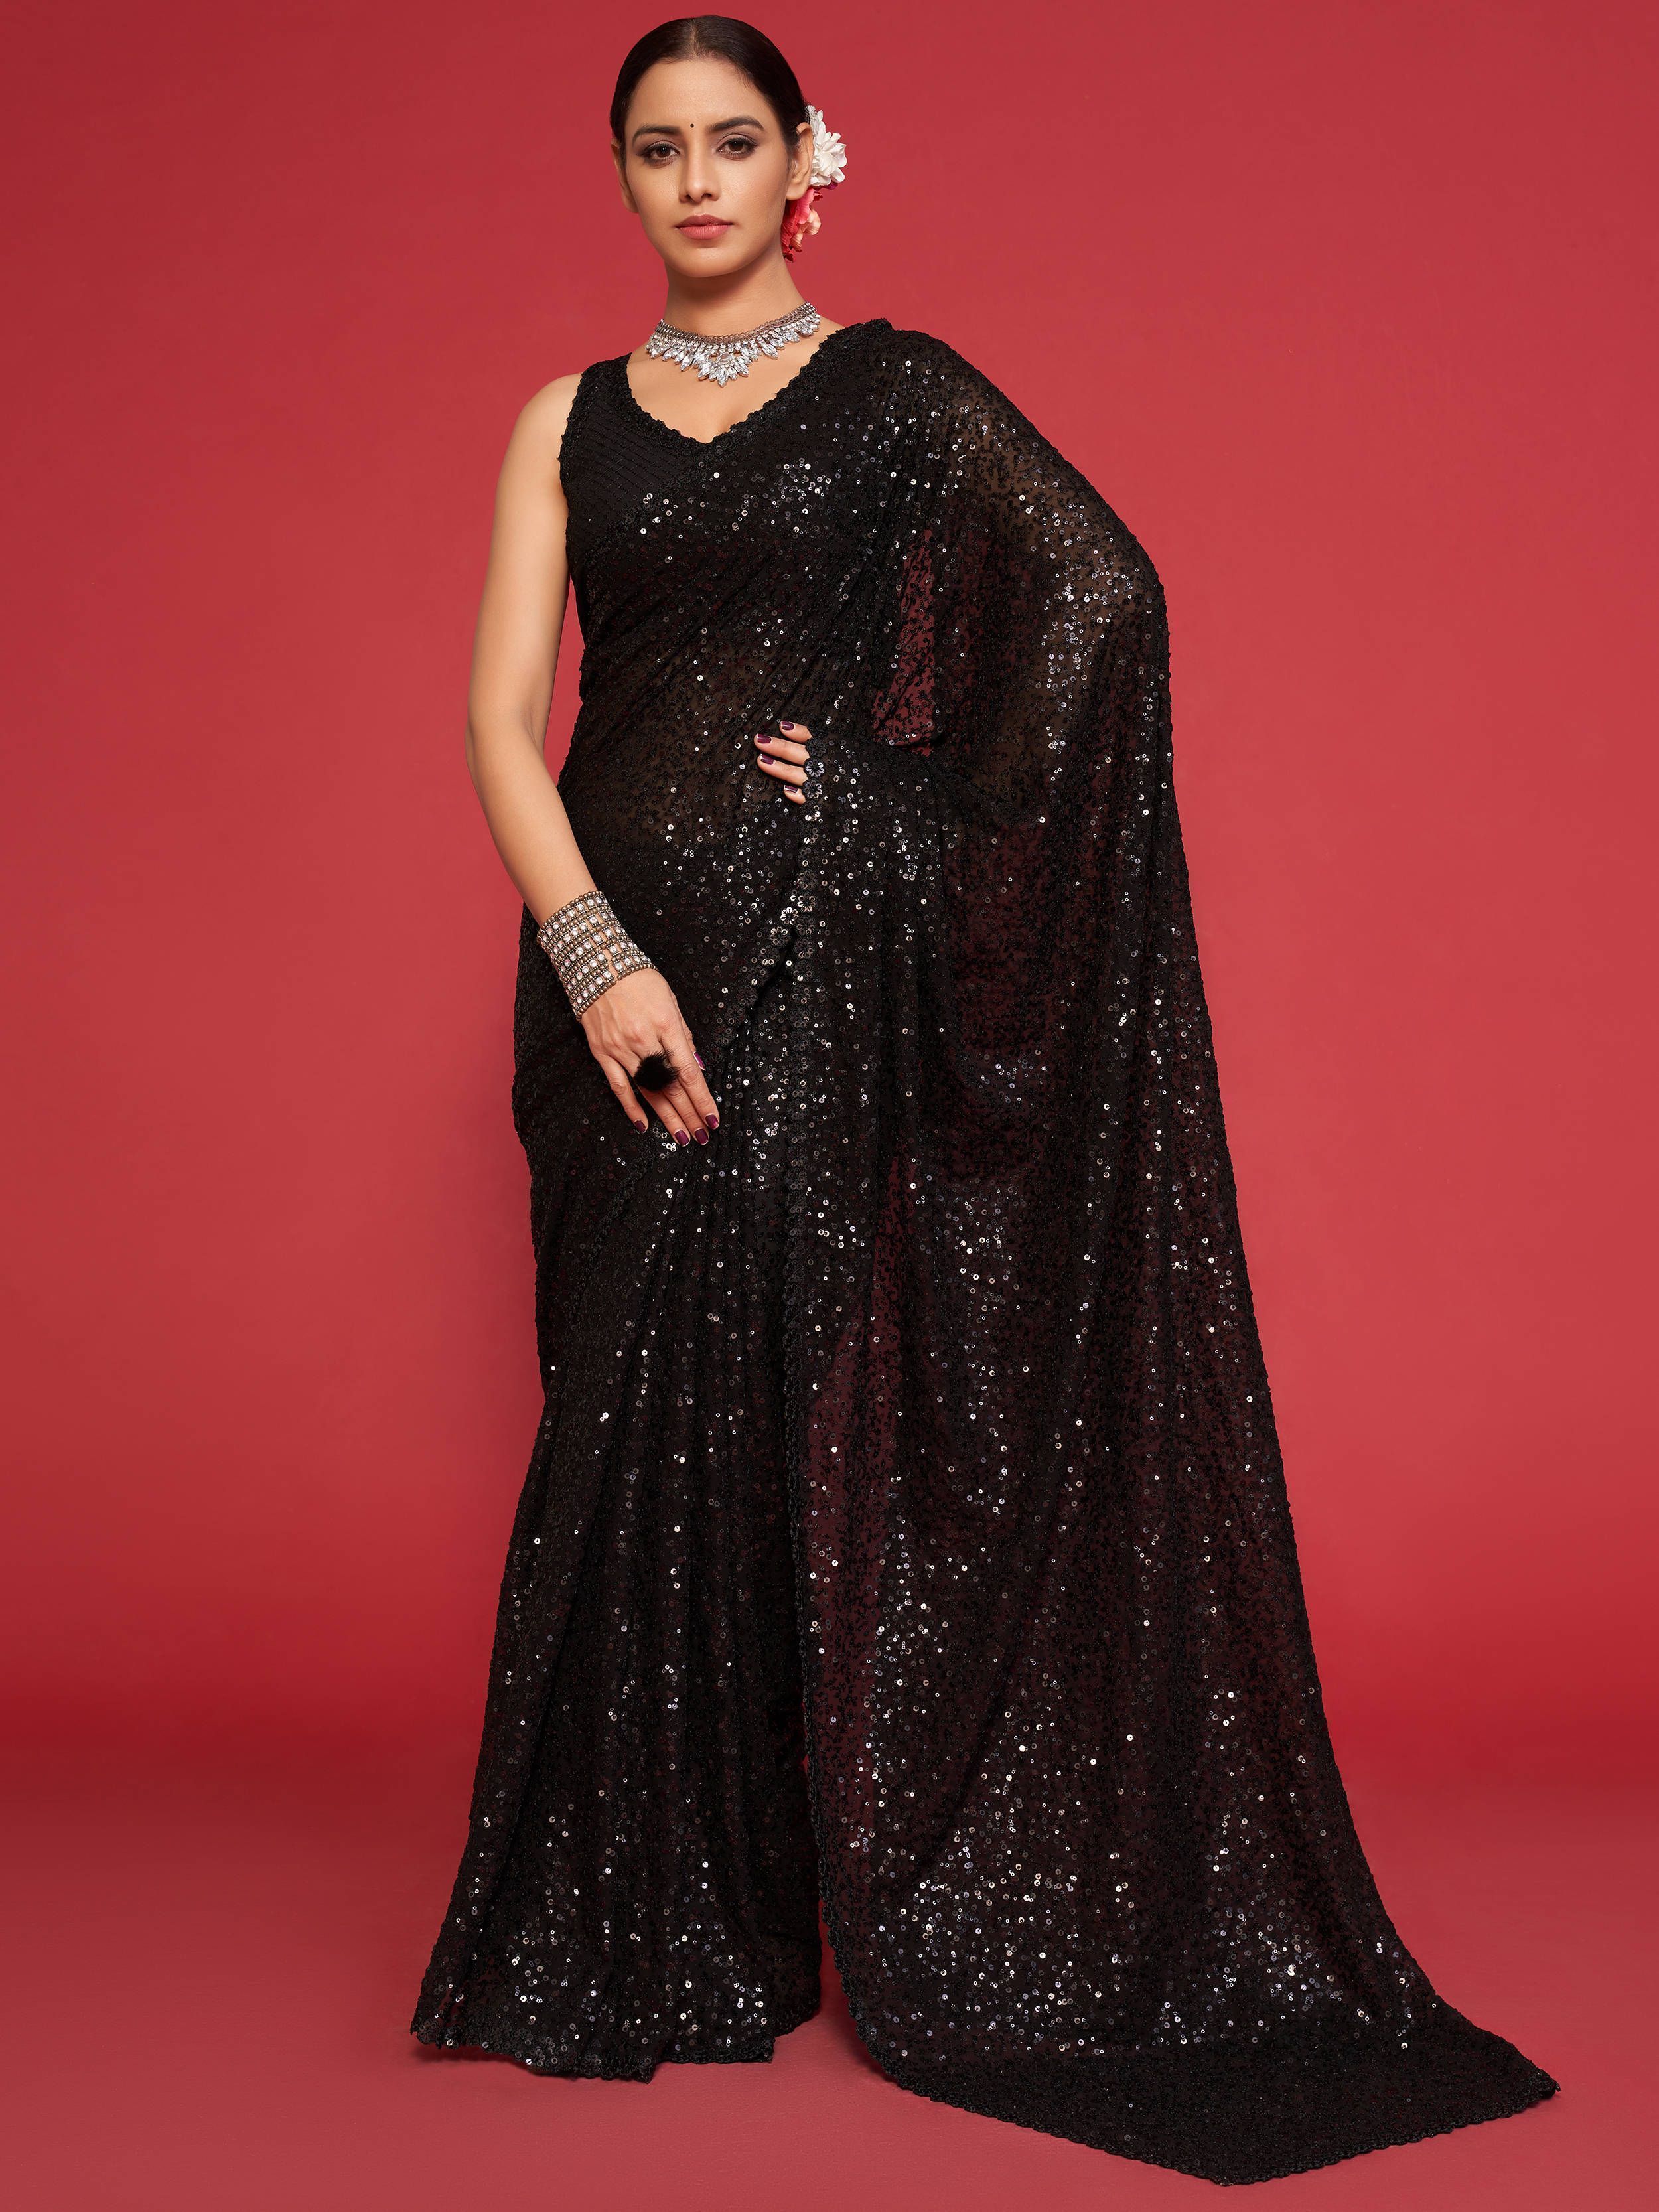 Buy Black Fully Sequined Georgette Party Wear Saree from EthnicPlus.